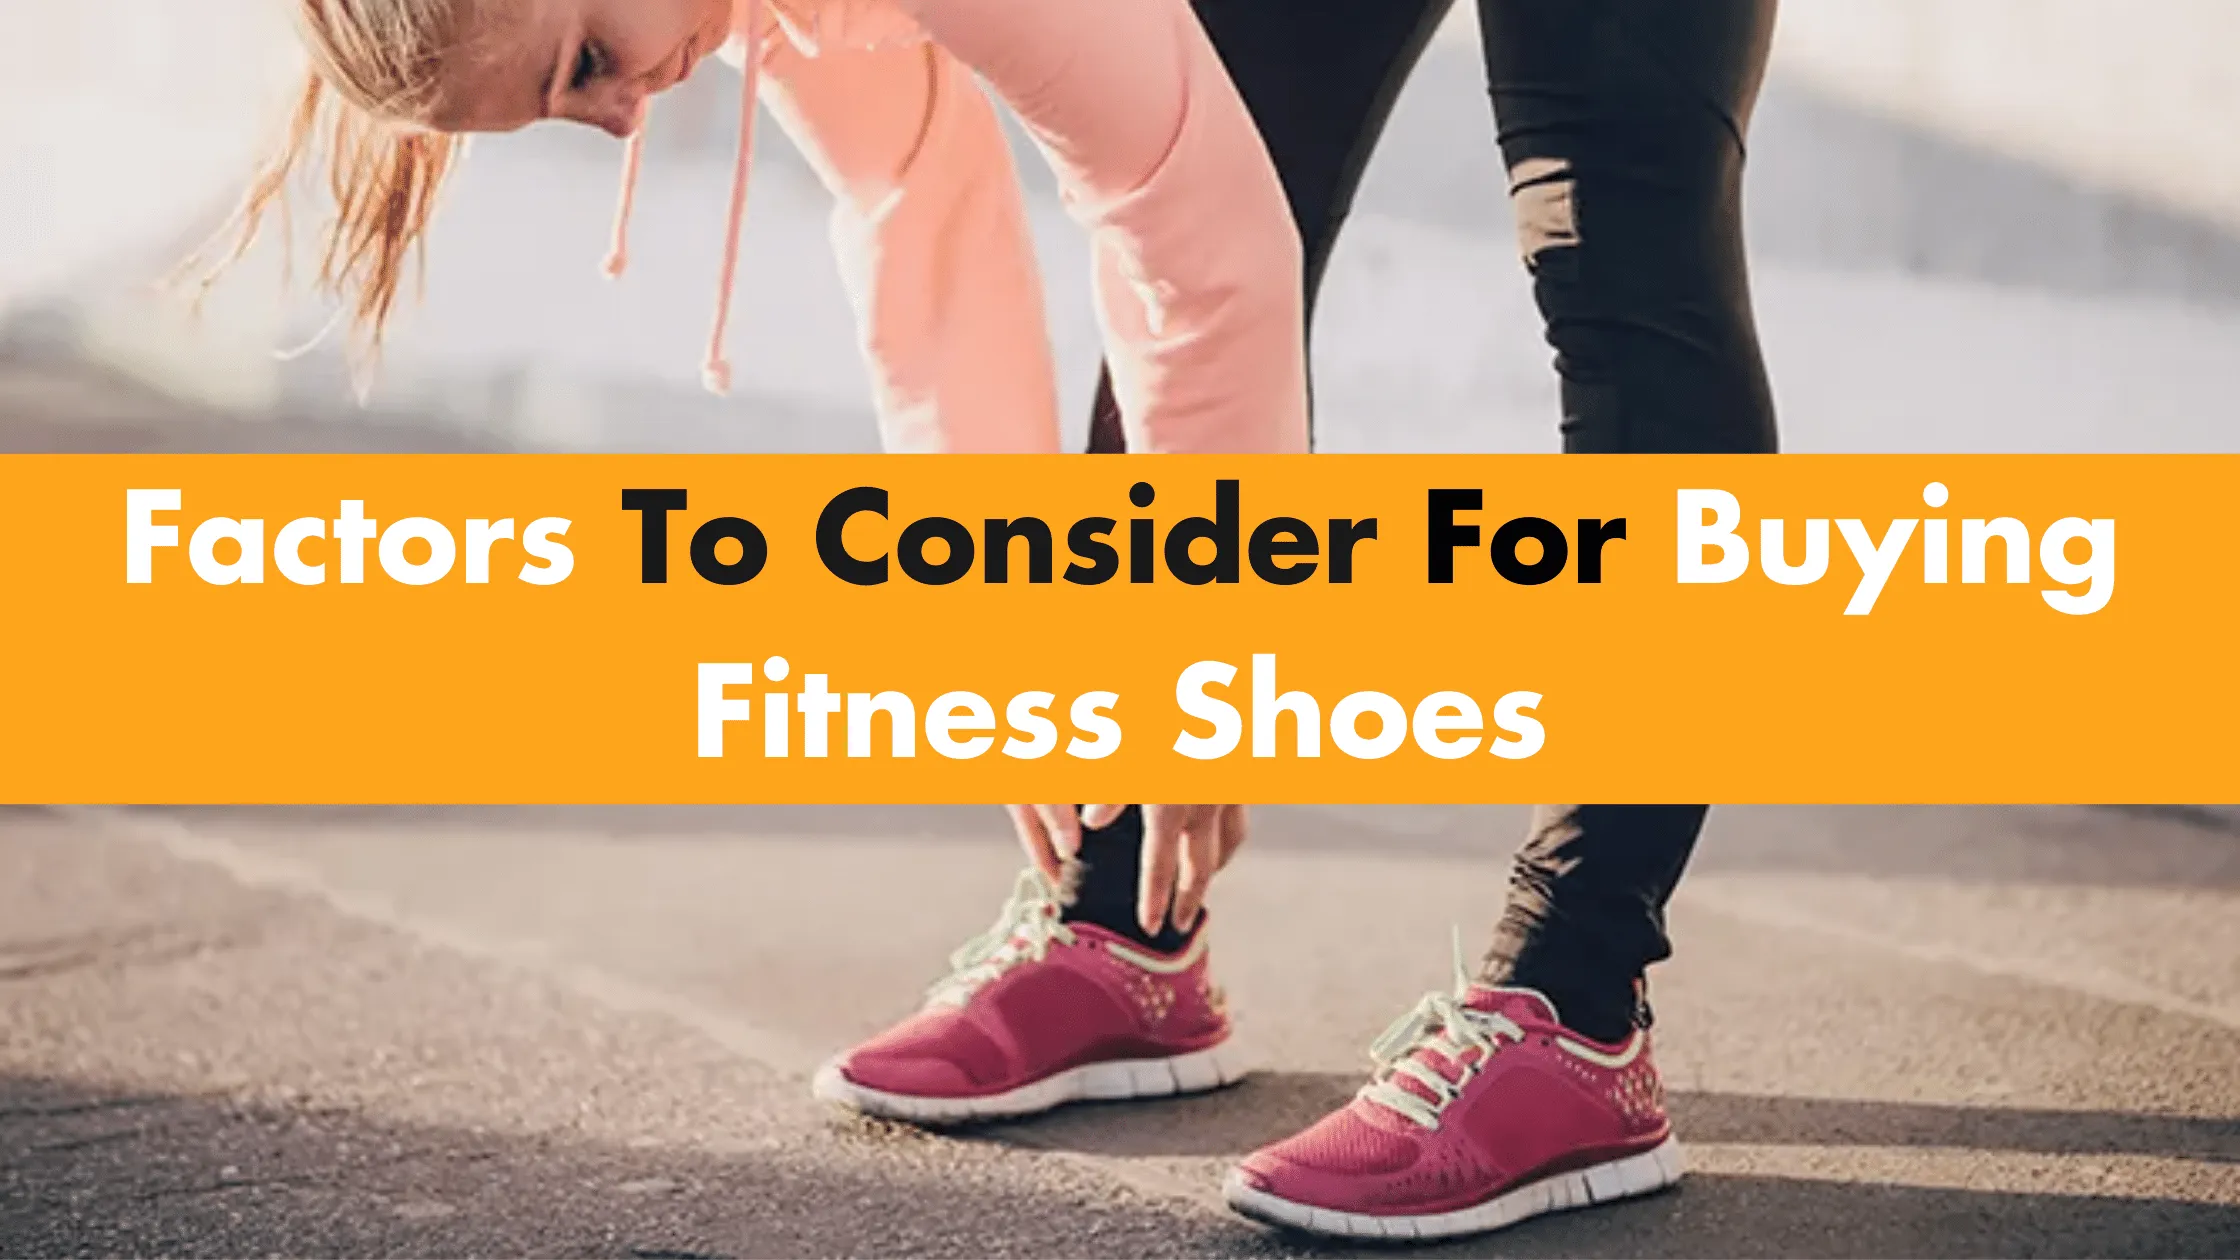 Factors To Consider For Buying Fitness Shoes